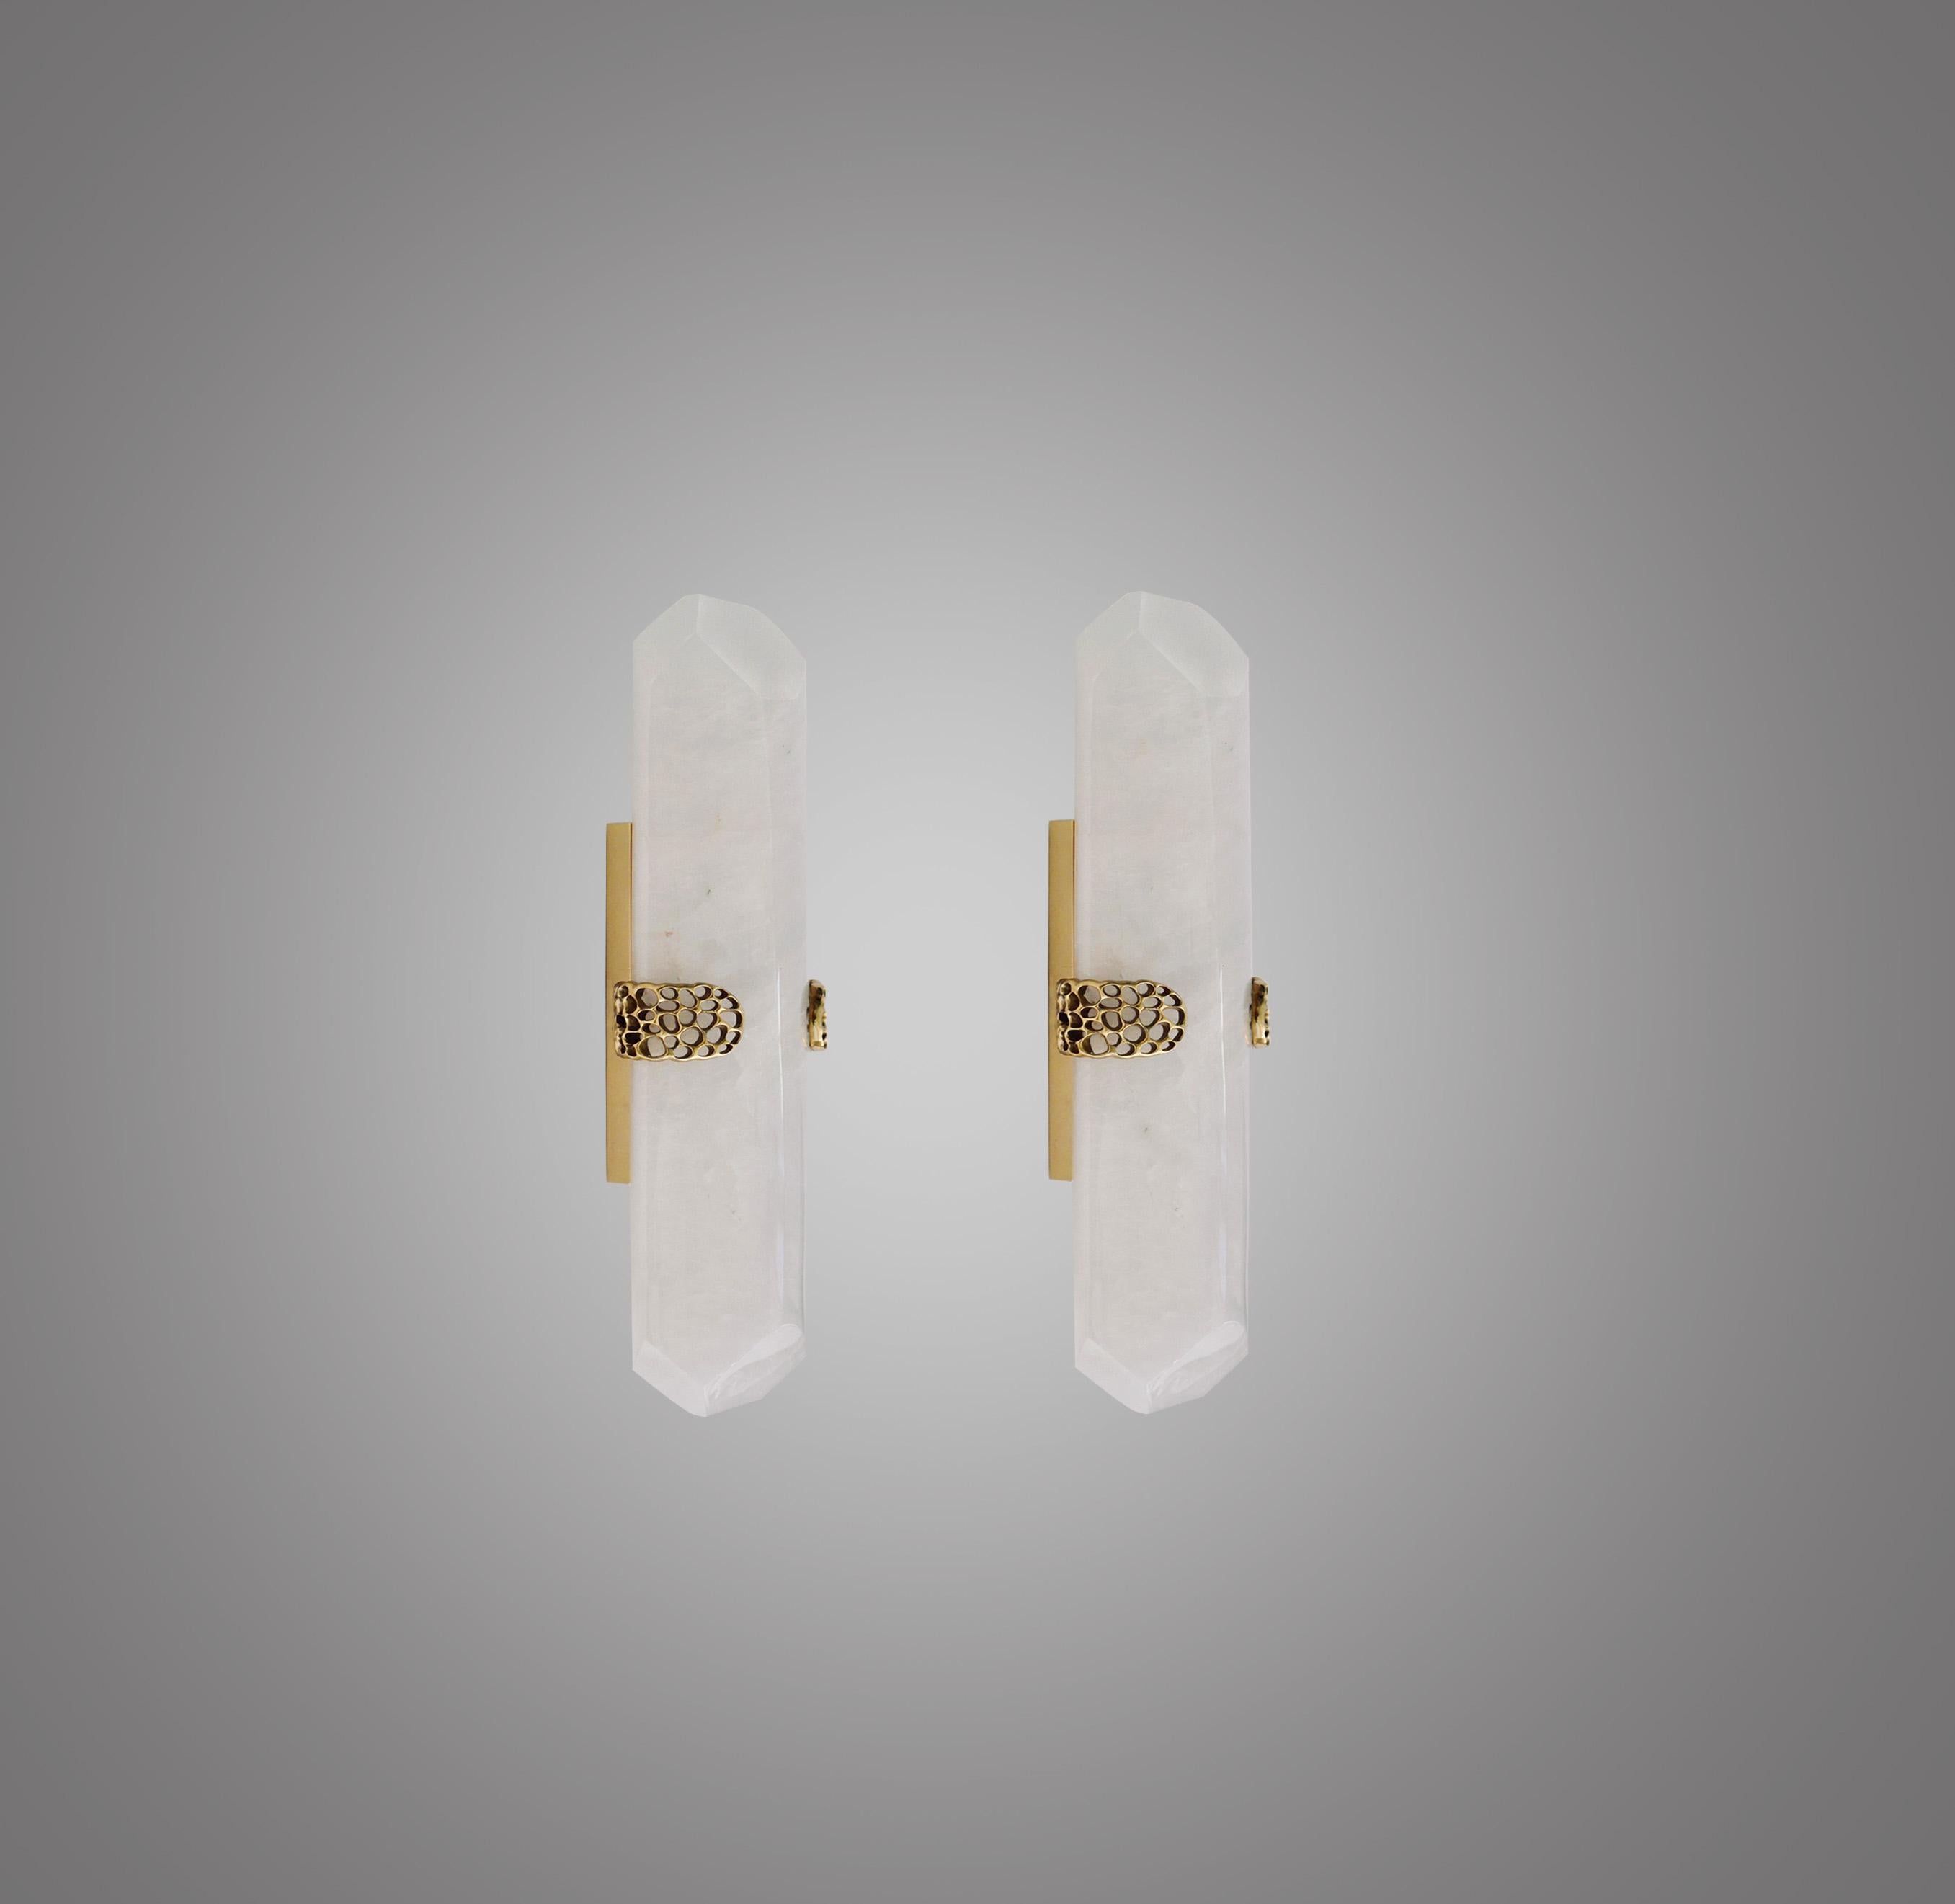 TDW22 Rock Crystal Sconces by Phoenix In Excellent Condition For Sale In New York, NY